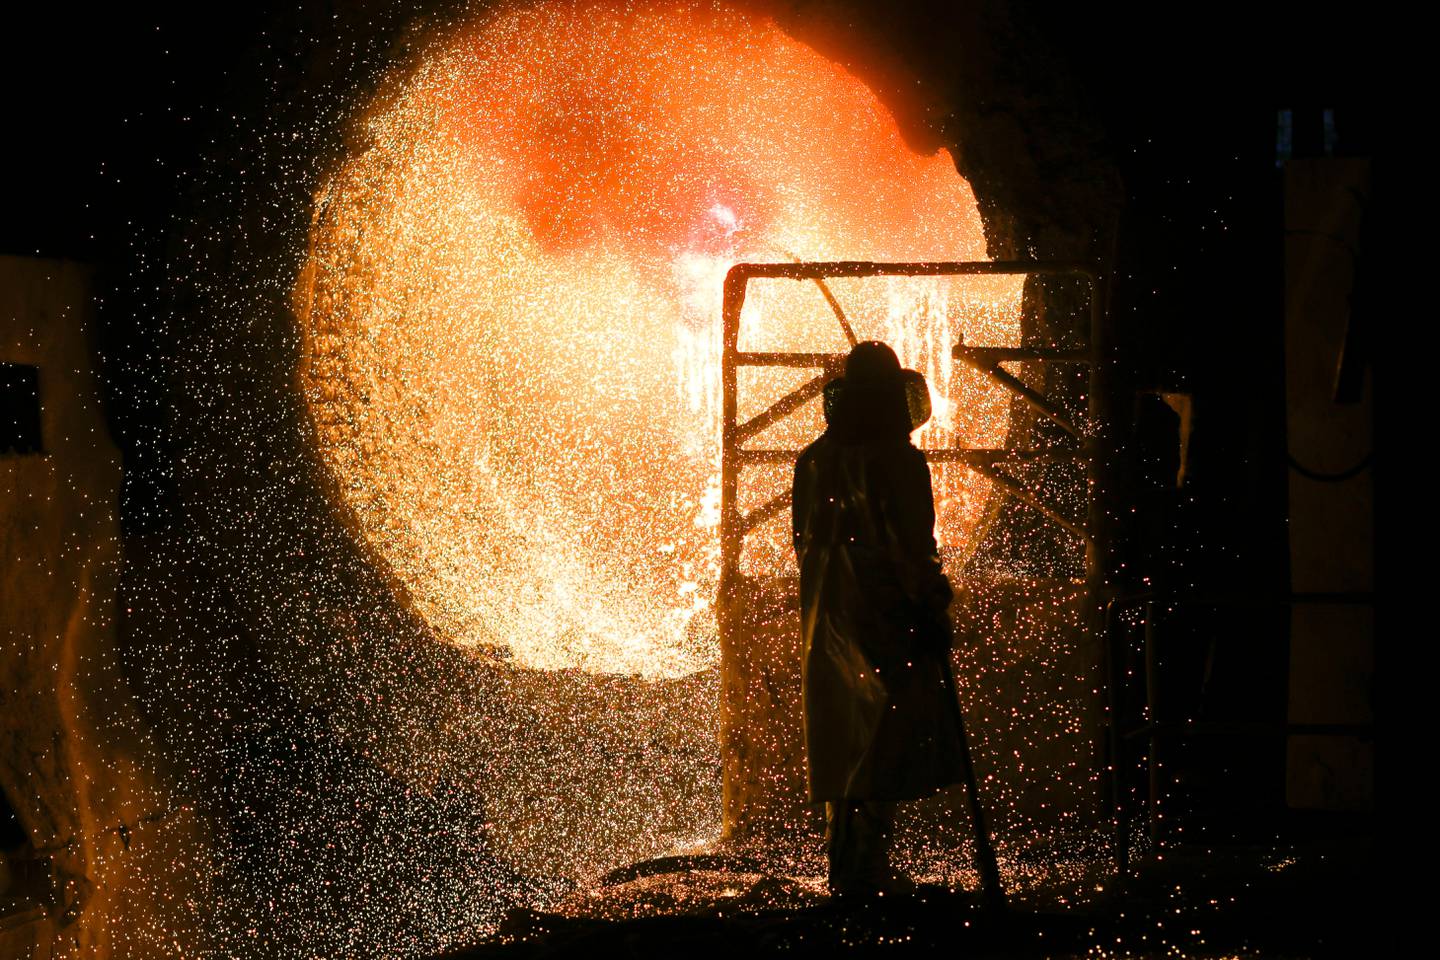 File - In this Tuesday, March 5, 2019, file photo, an employee in protective clothing works with a steel pouring ladle during a guided media tour at the steel producer Salzgitter AG in Salzgitter. The German economy shrank by 0.1 percent in the second quarter from the previous quarter as global trade conflicts and troubles in the auto industry weighed on Europe's largest economy. (AP Photo/Markus Schreiber)